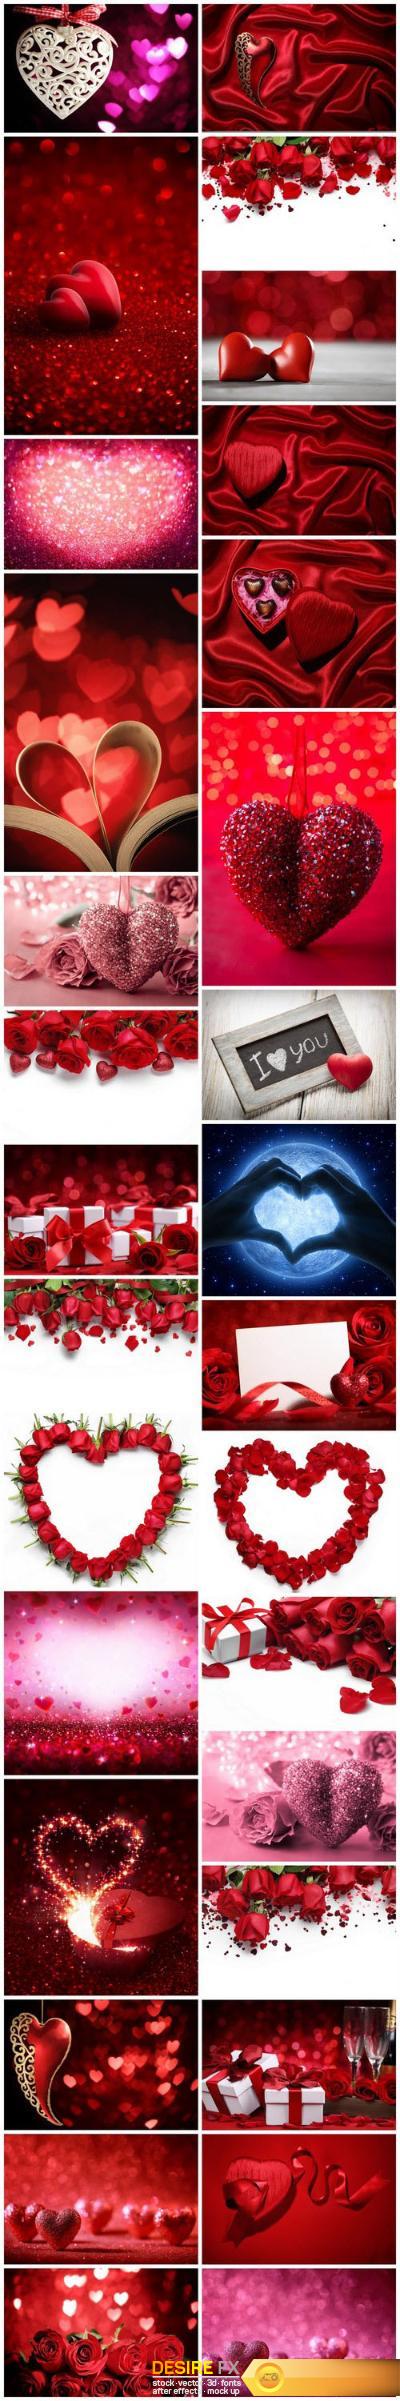 Love, Romance, Heart - Valentines Day - Set of 30xUHQ JPEG Professional Stock Images